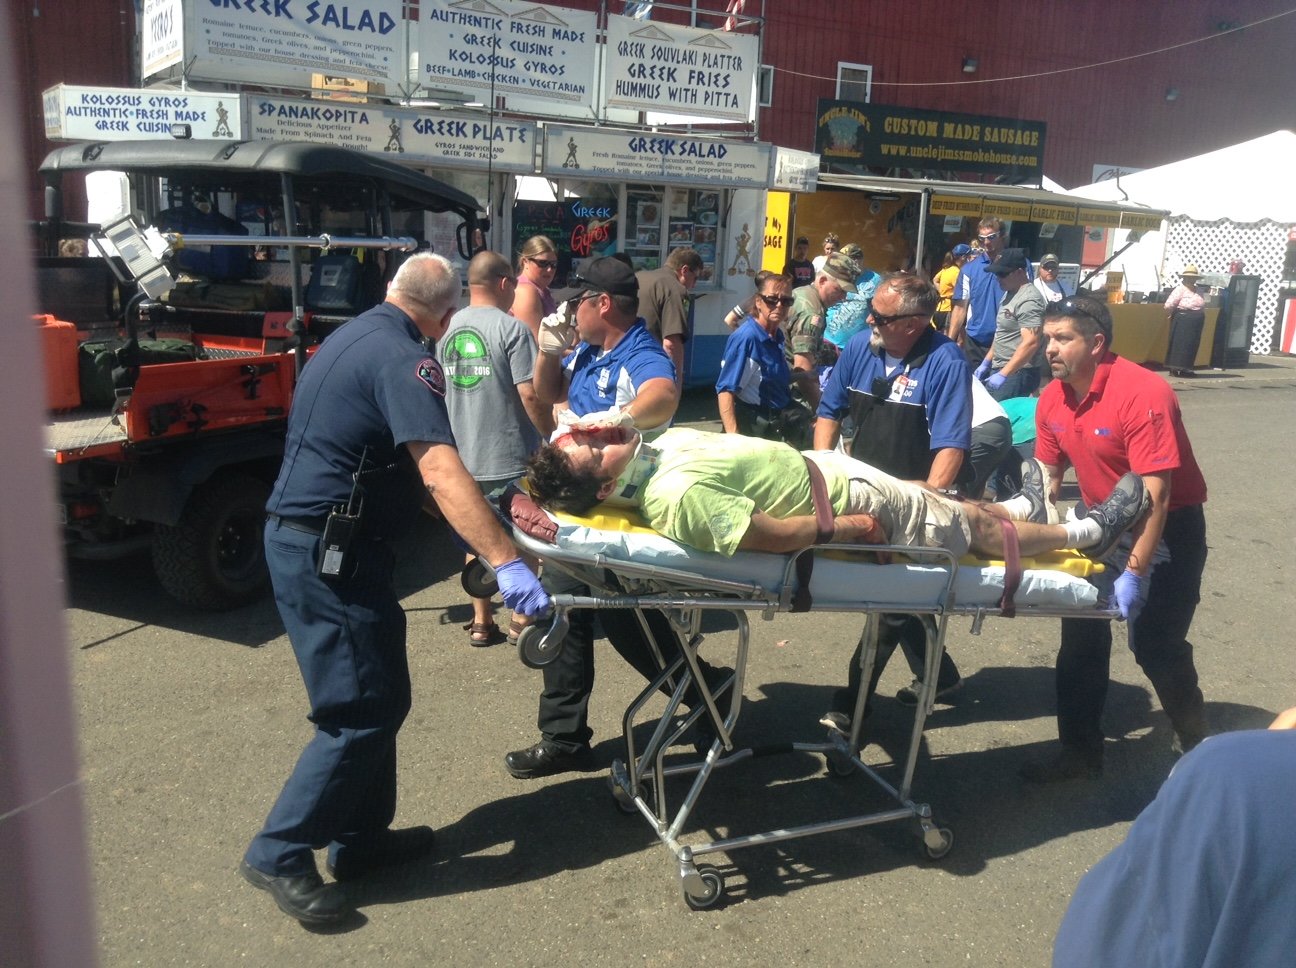 Several people were injured in August after a horse became startled and bolted down the midway, according to the Riverside Fire Authority.